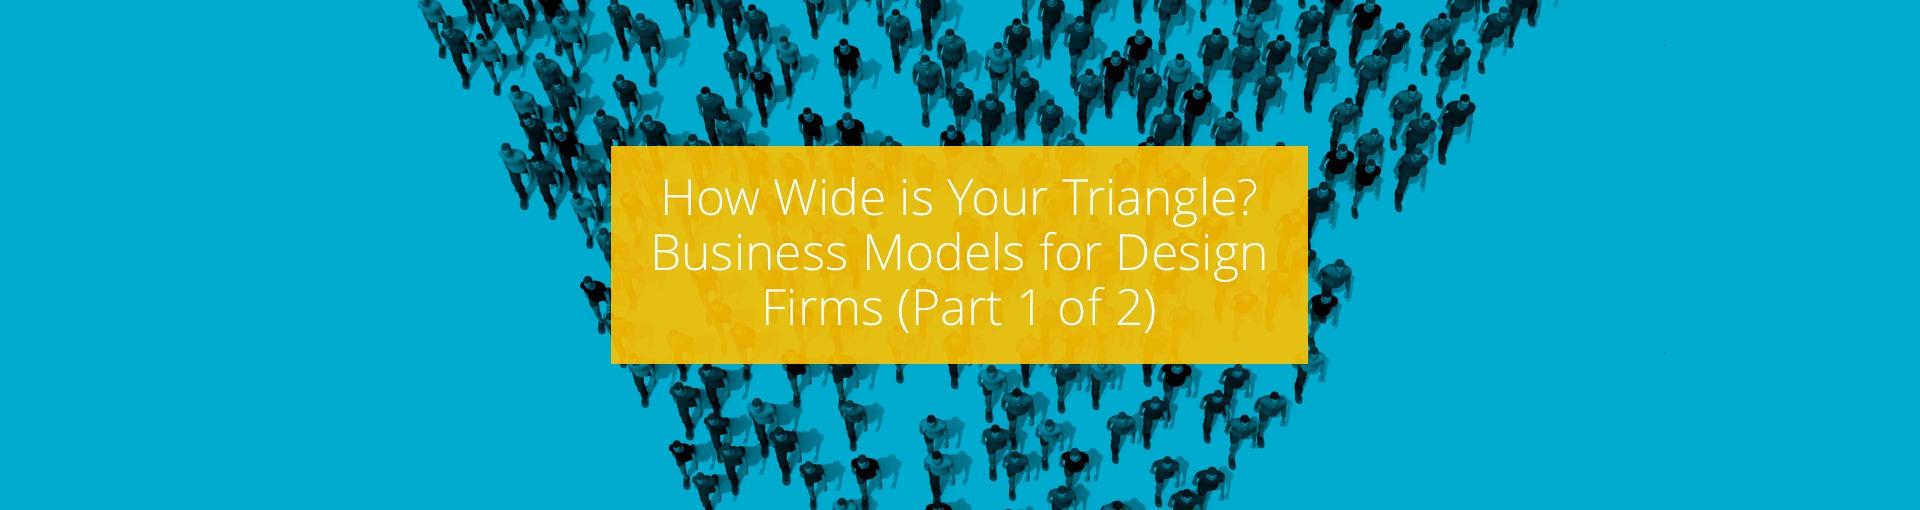 How Wide is Your Triangle? Business Models for Design Firms (Part 1 of 2) Featured Image